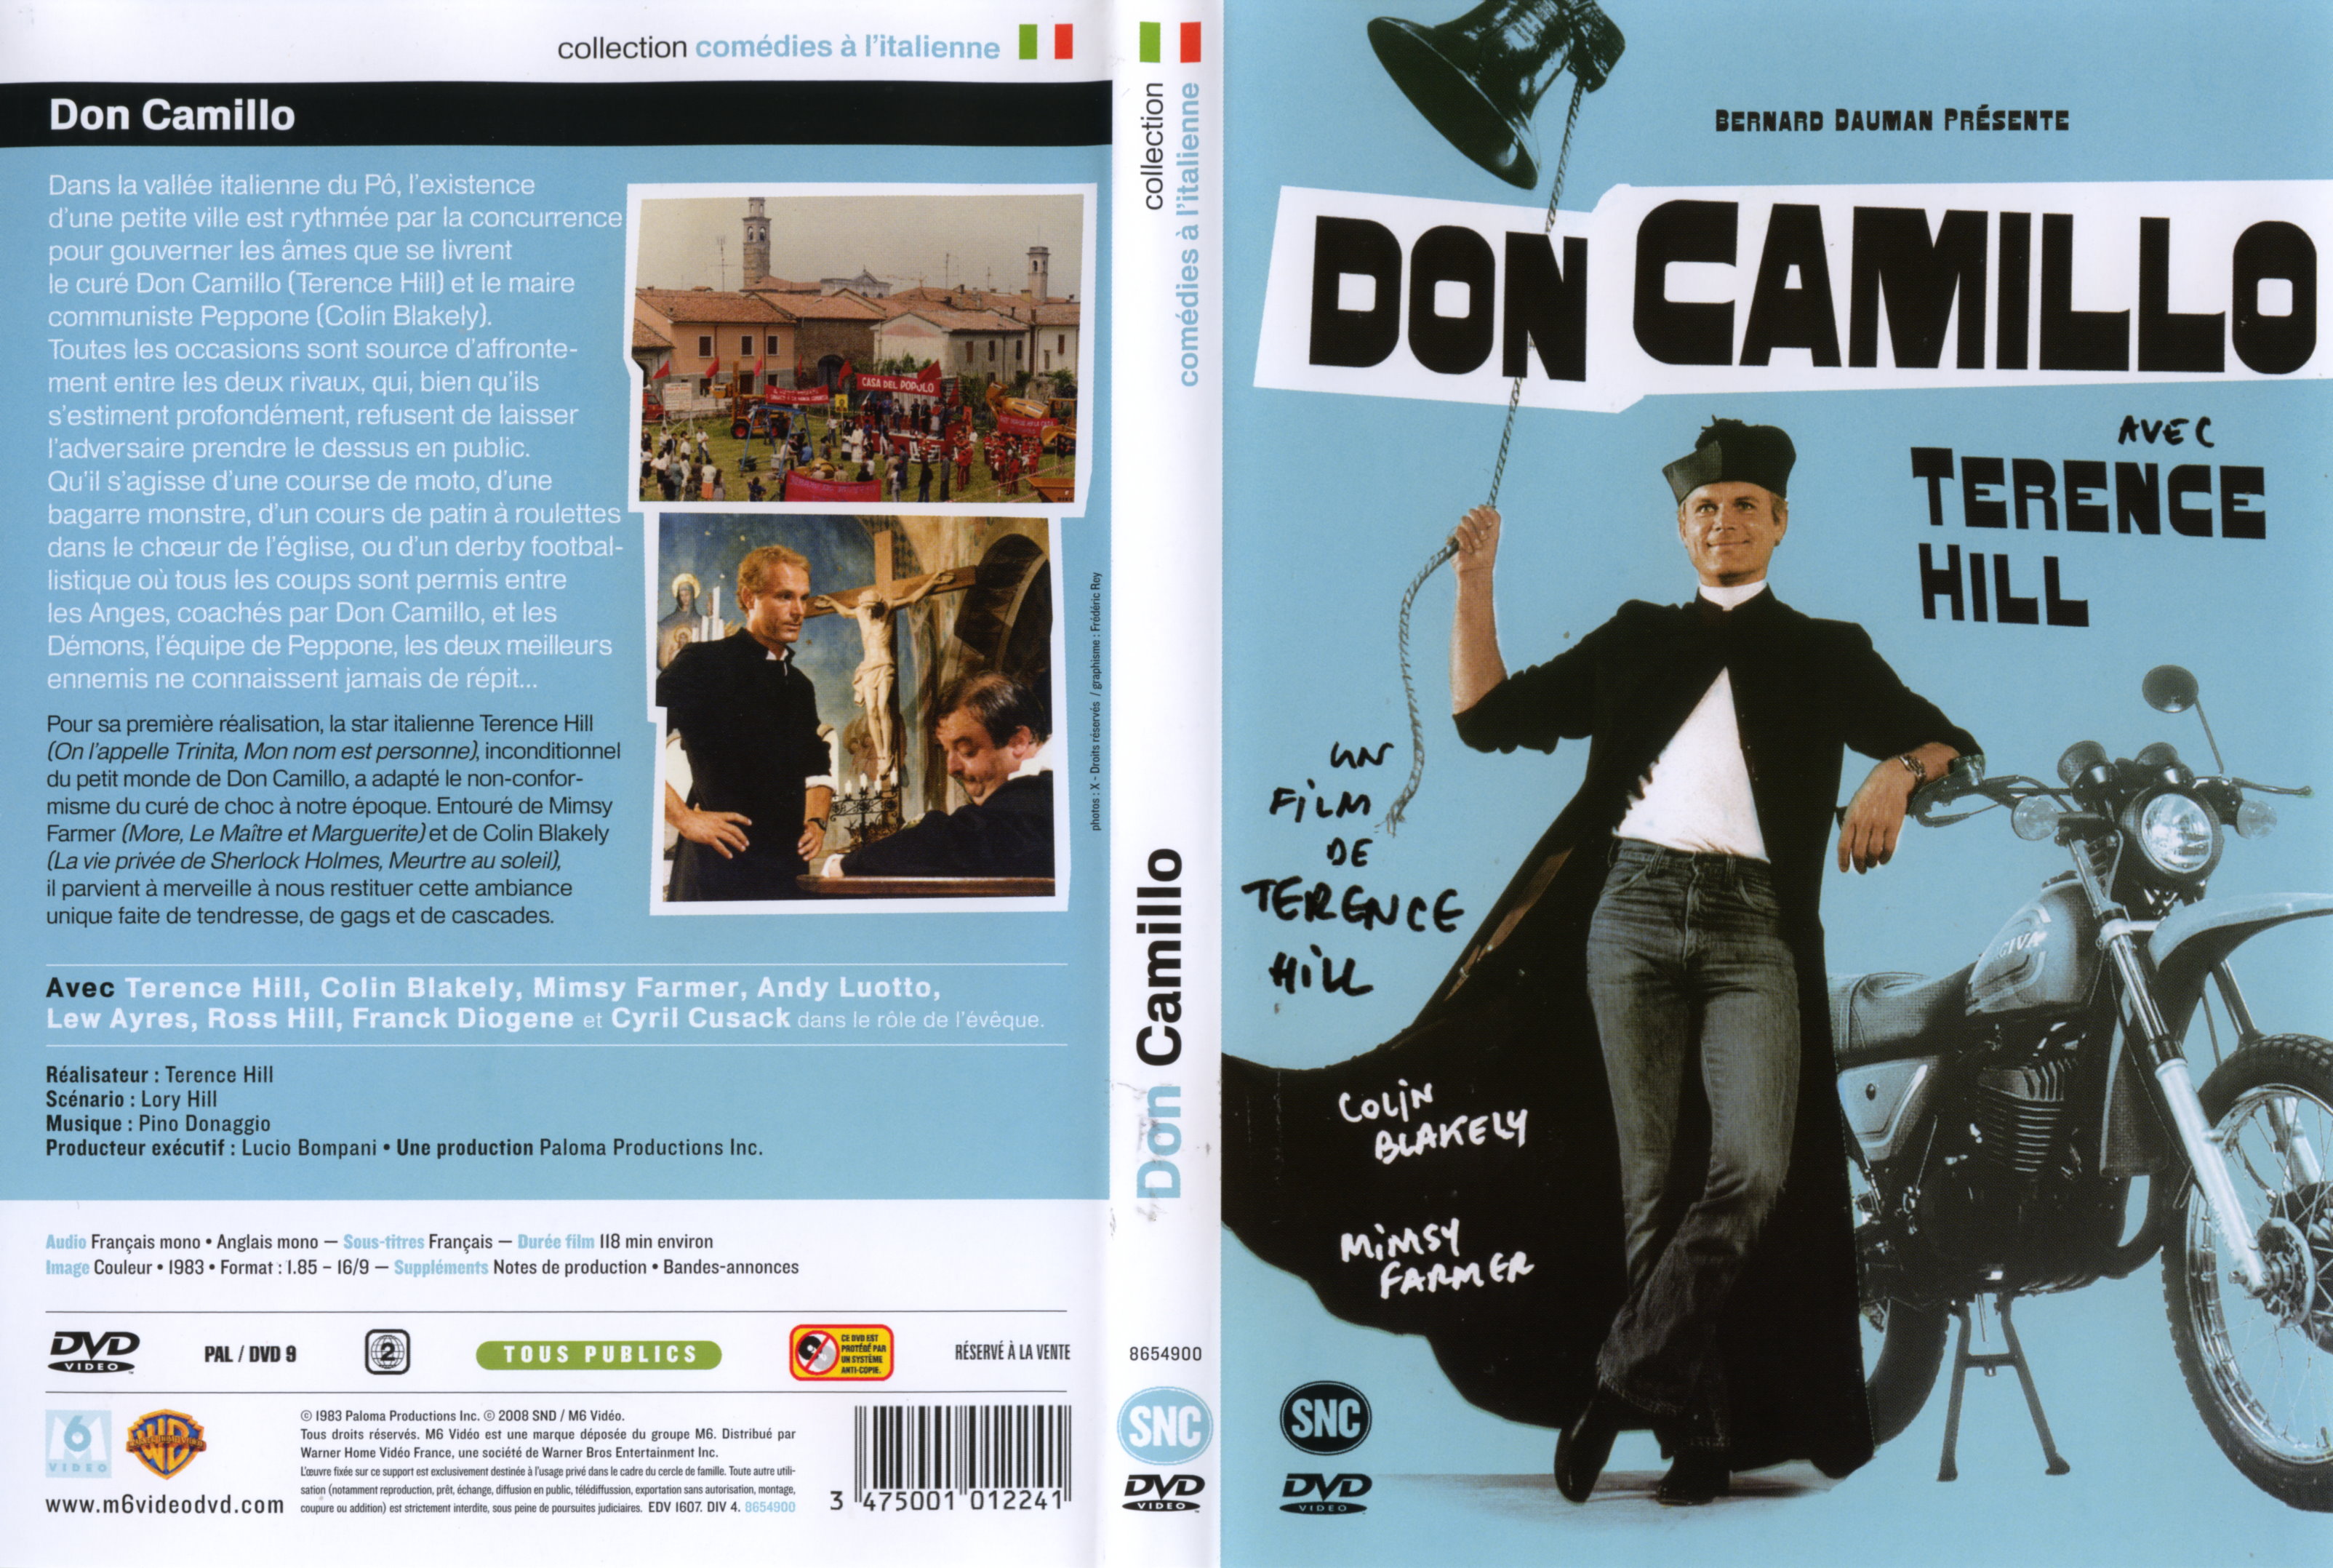 Jaquette DVD Don Camillo (Terence Hill)